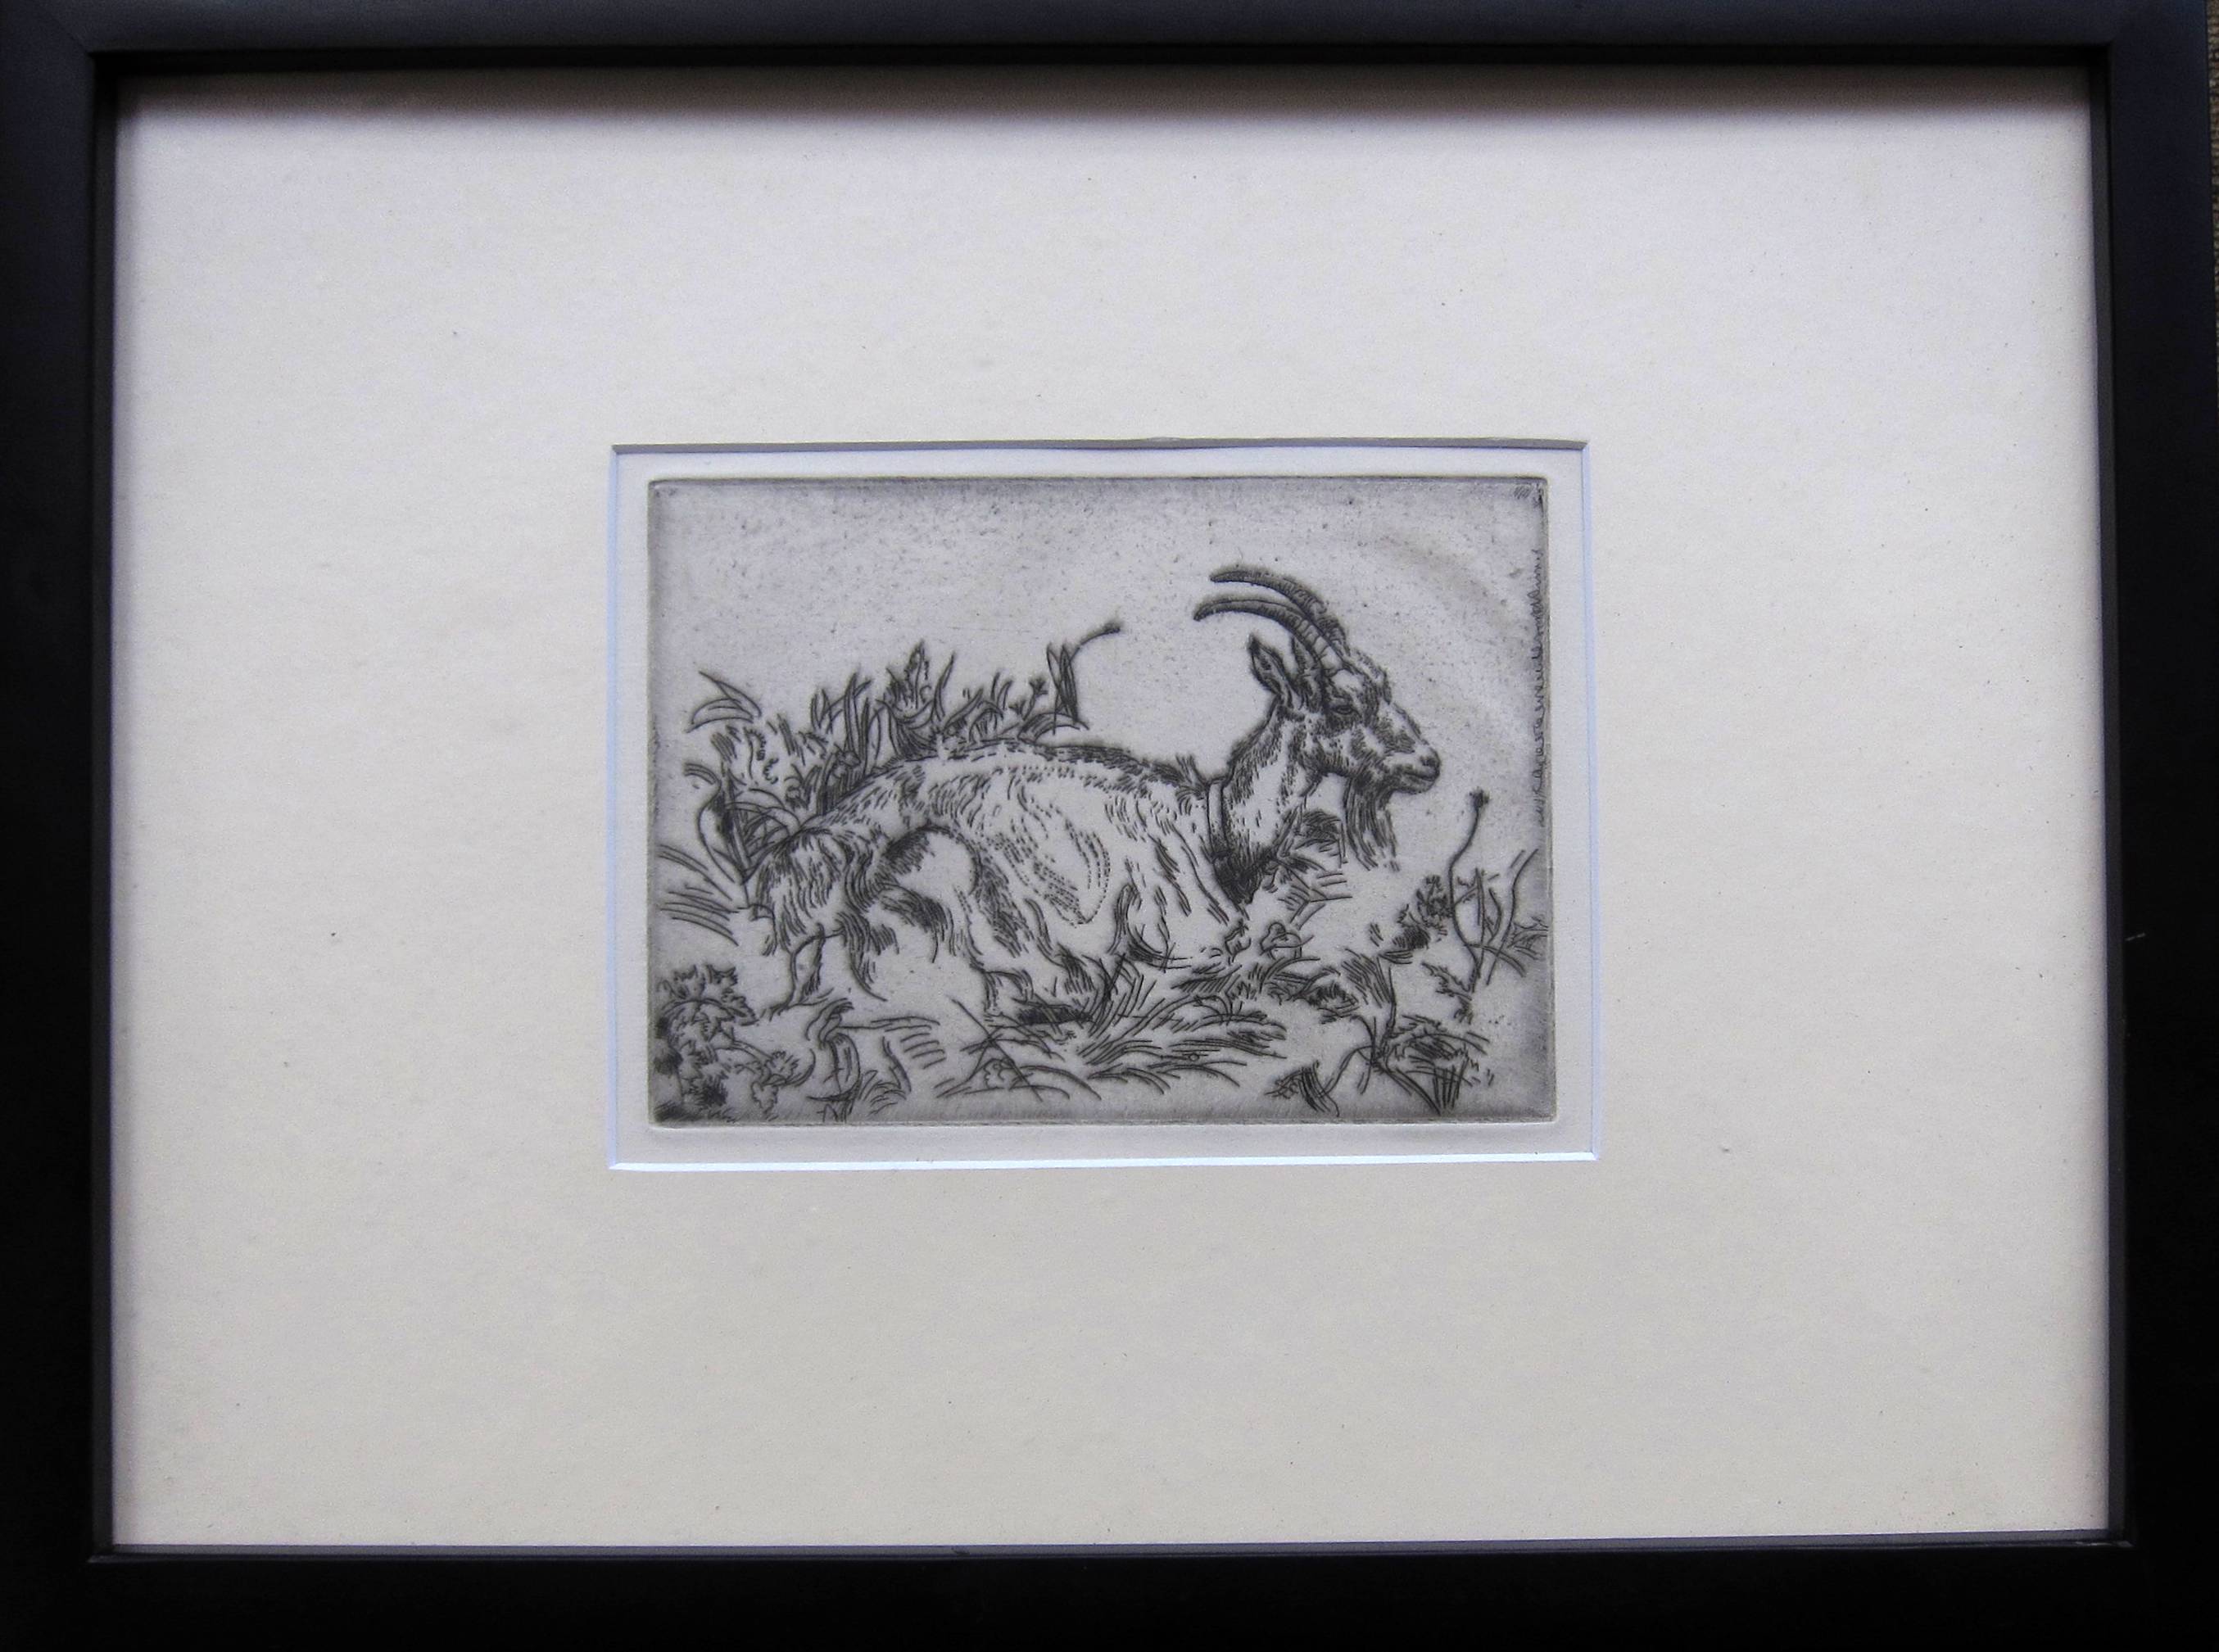 LEON UNDERWOOD [1890-1975]. Goat, 1921. etching, edition of 50 [10/50]. A rare print, so unlikely - Image 2 of 2